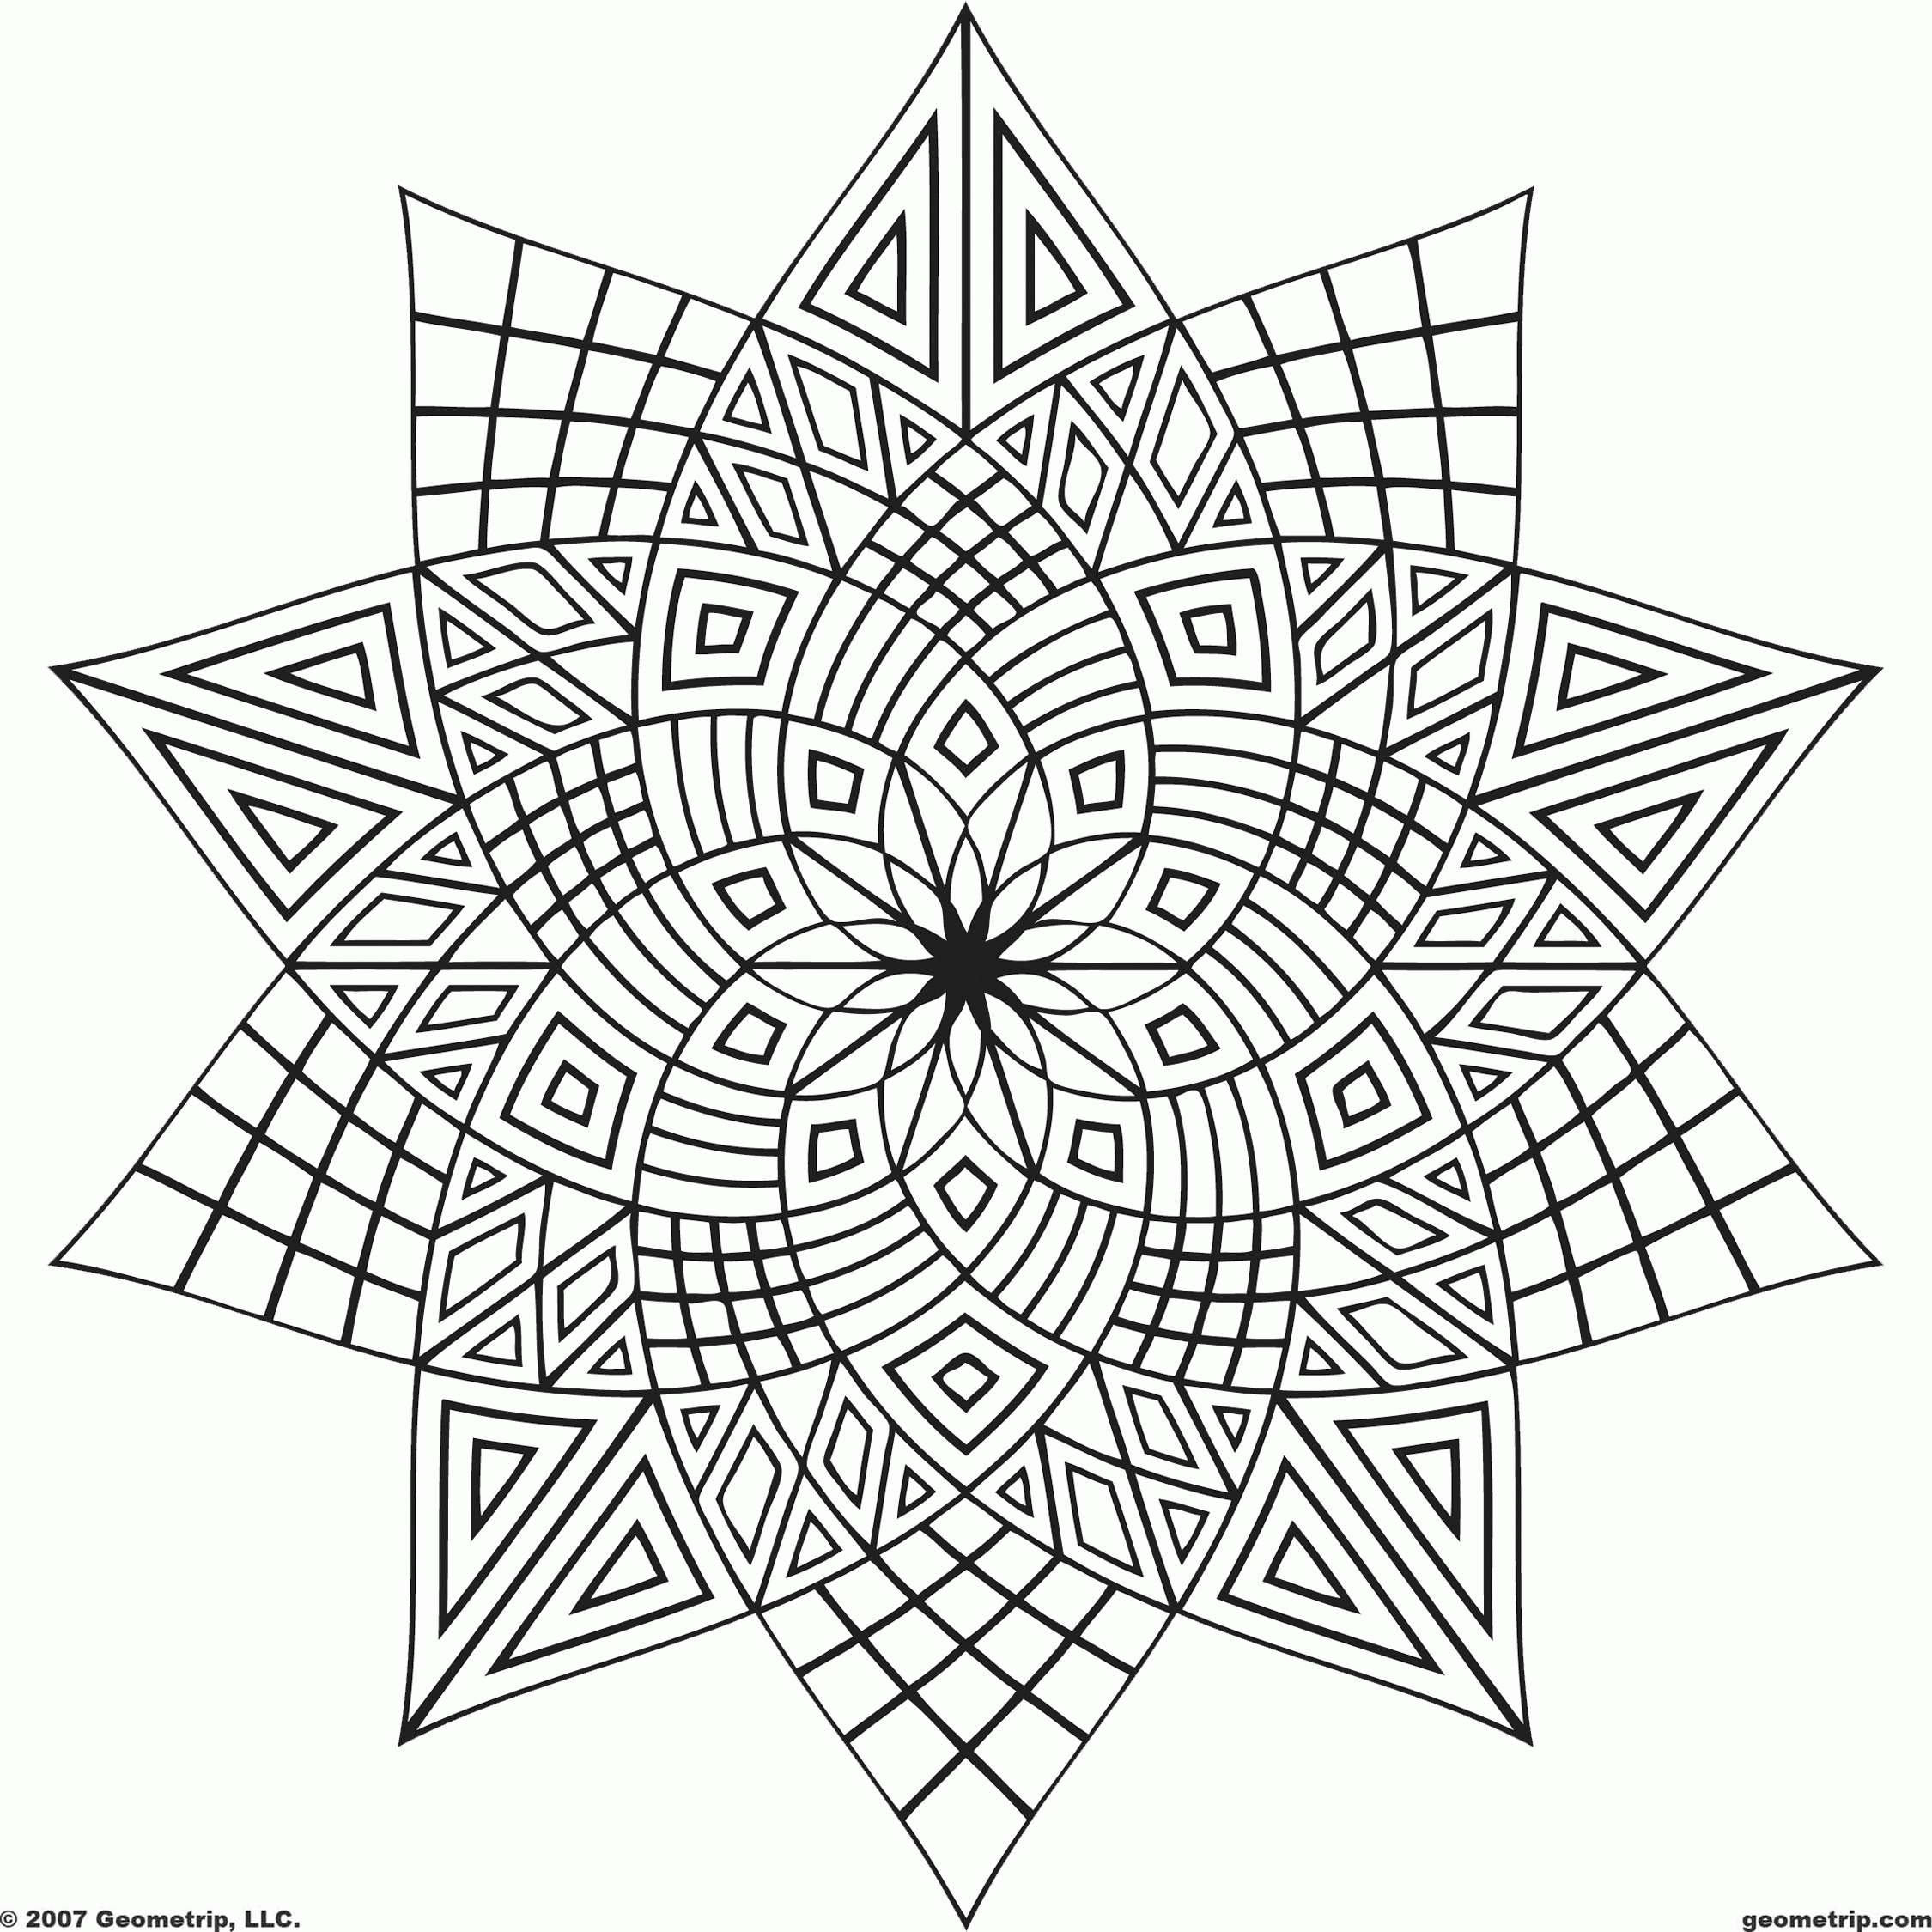 fun designs to color coloring pages of cool designs coloring home designs fun color to 